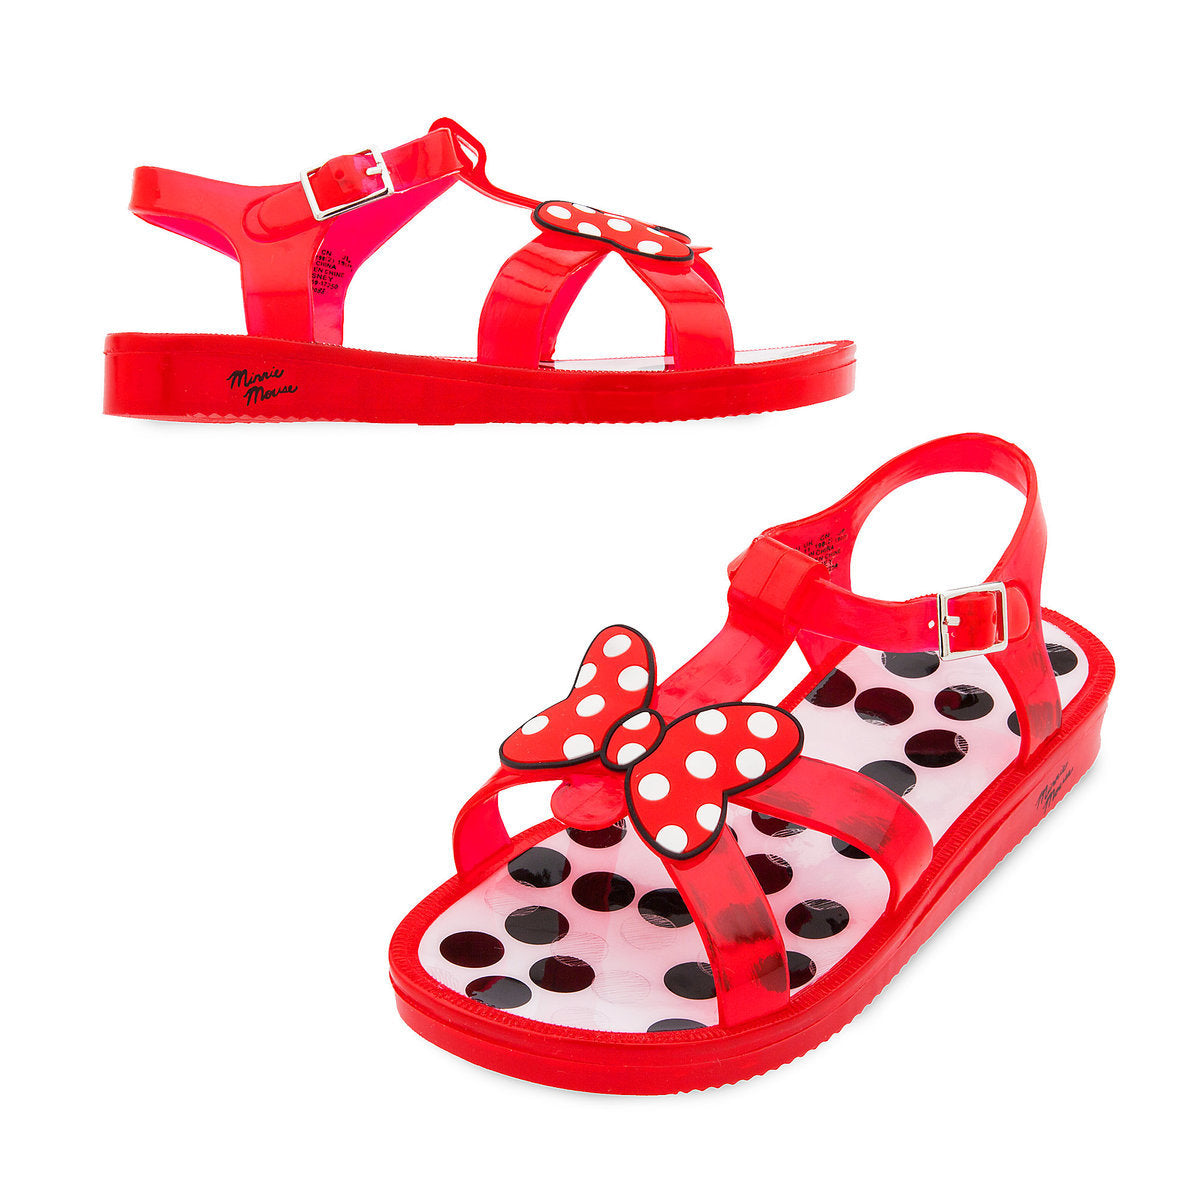 Disney's Minnie Mouse Jelly Sandal for Girls